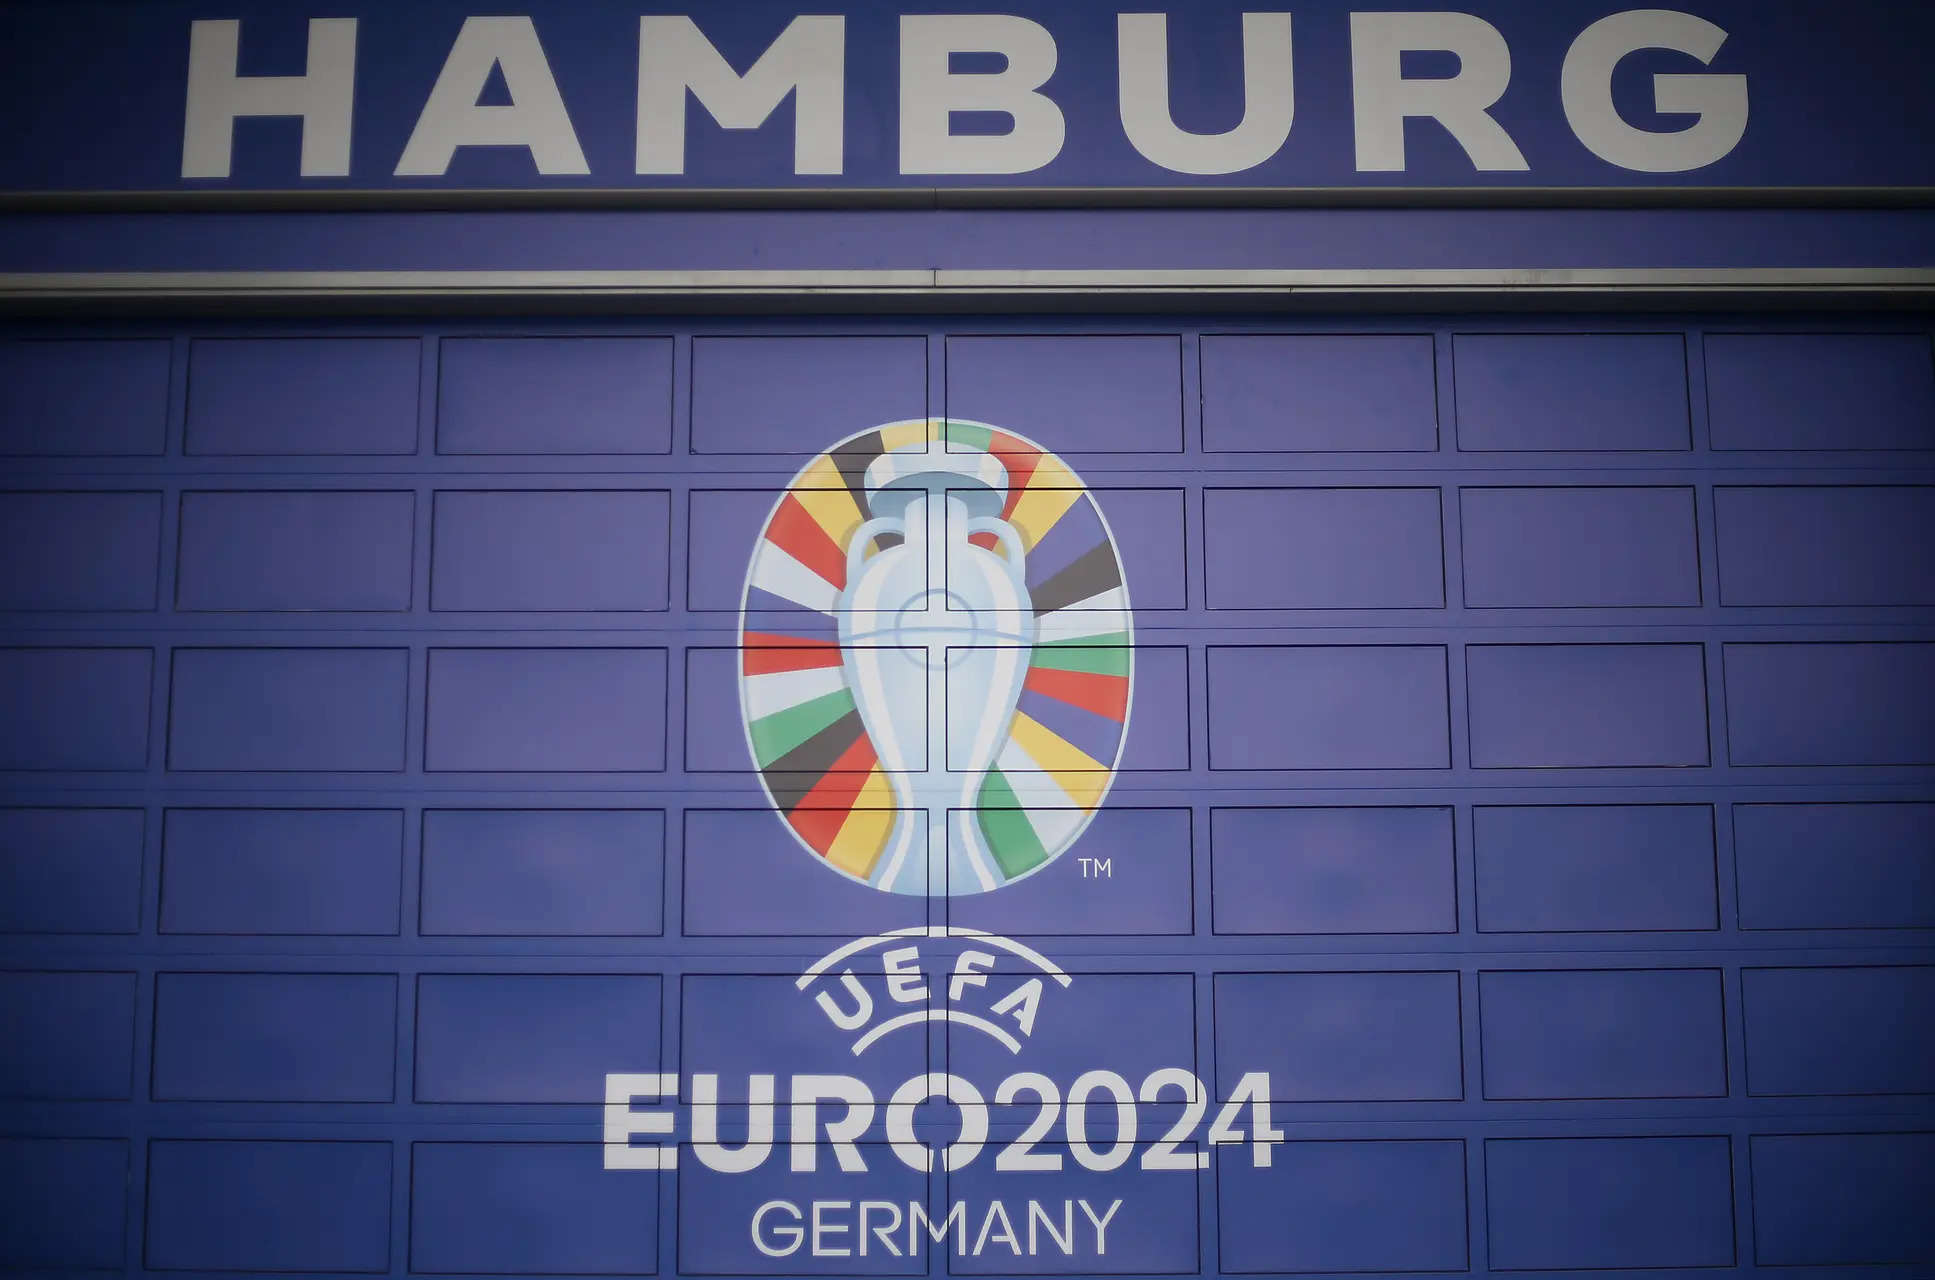 UEFA Euro 2024: This country is likely to be champions, predicts supercomputer 